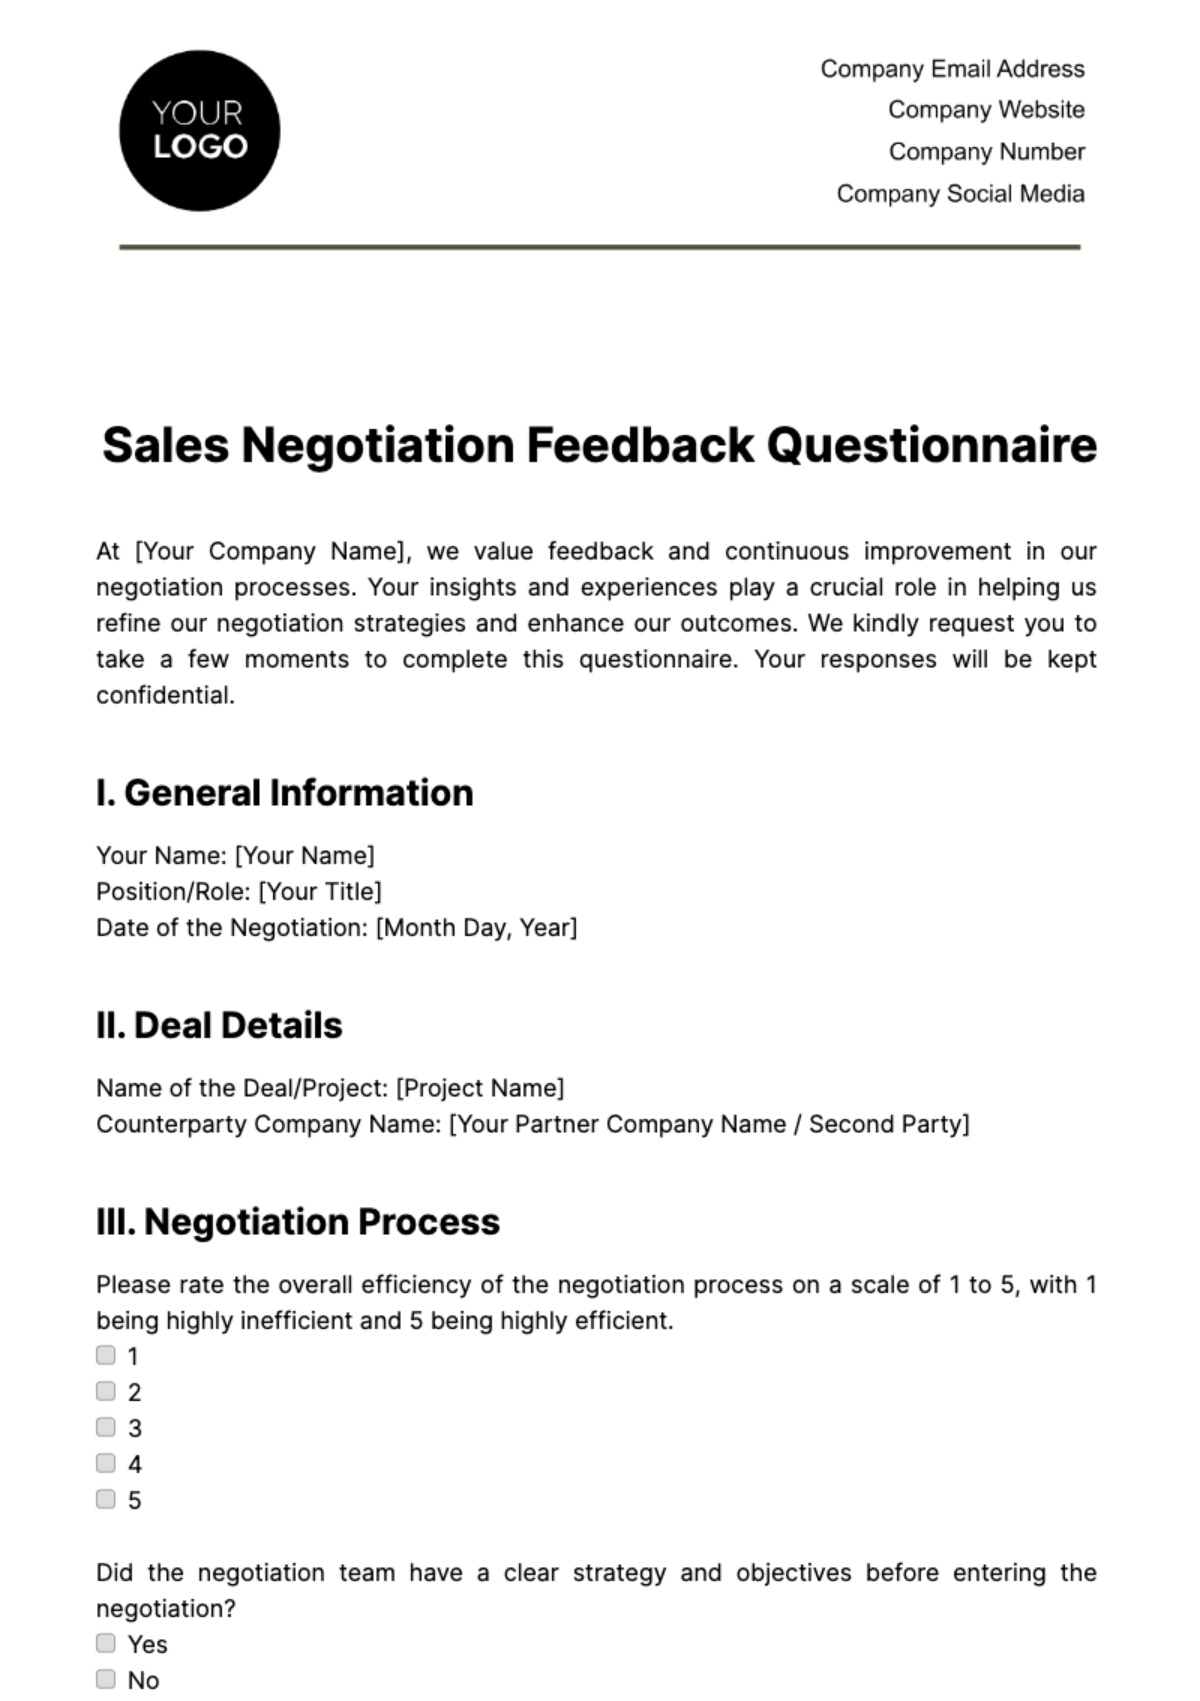 Free Sales Negotiation Feedback Questionnaire Template